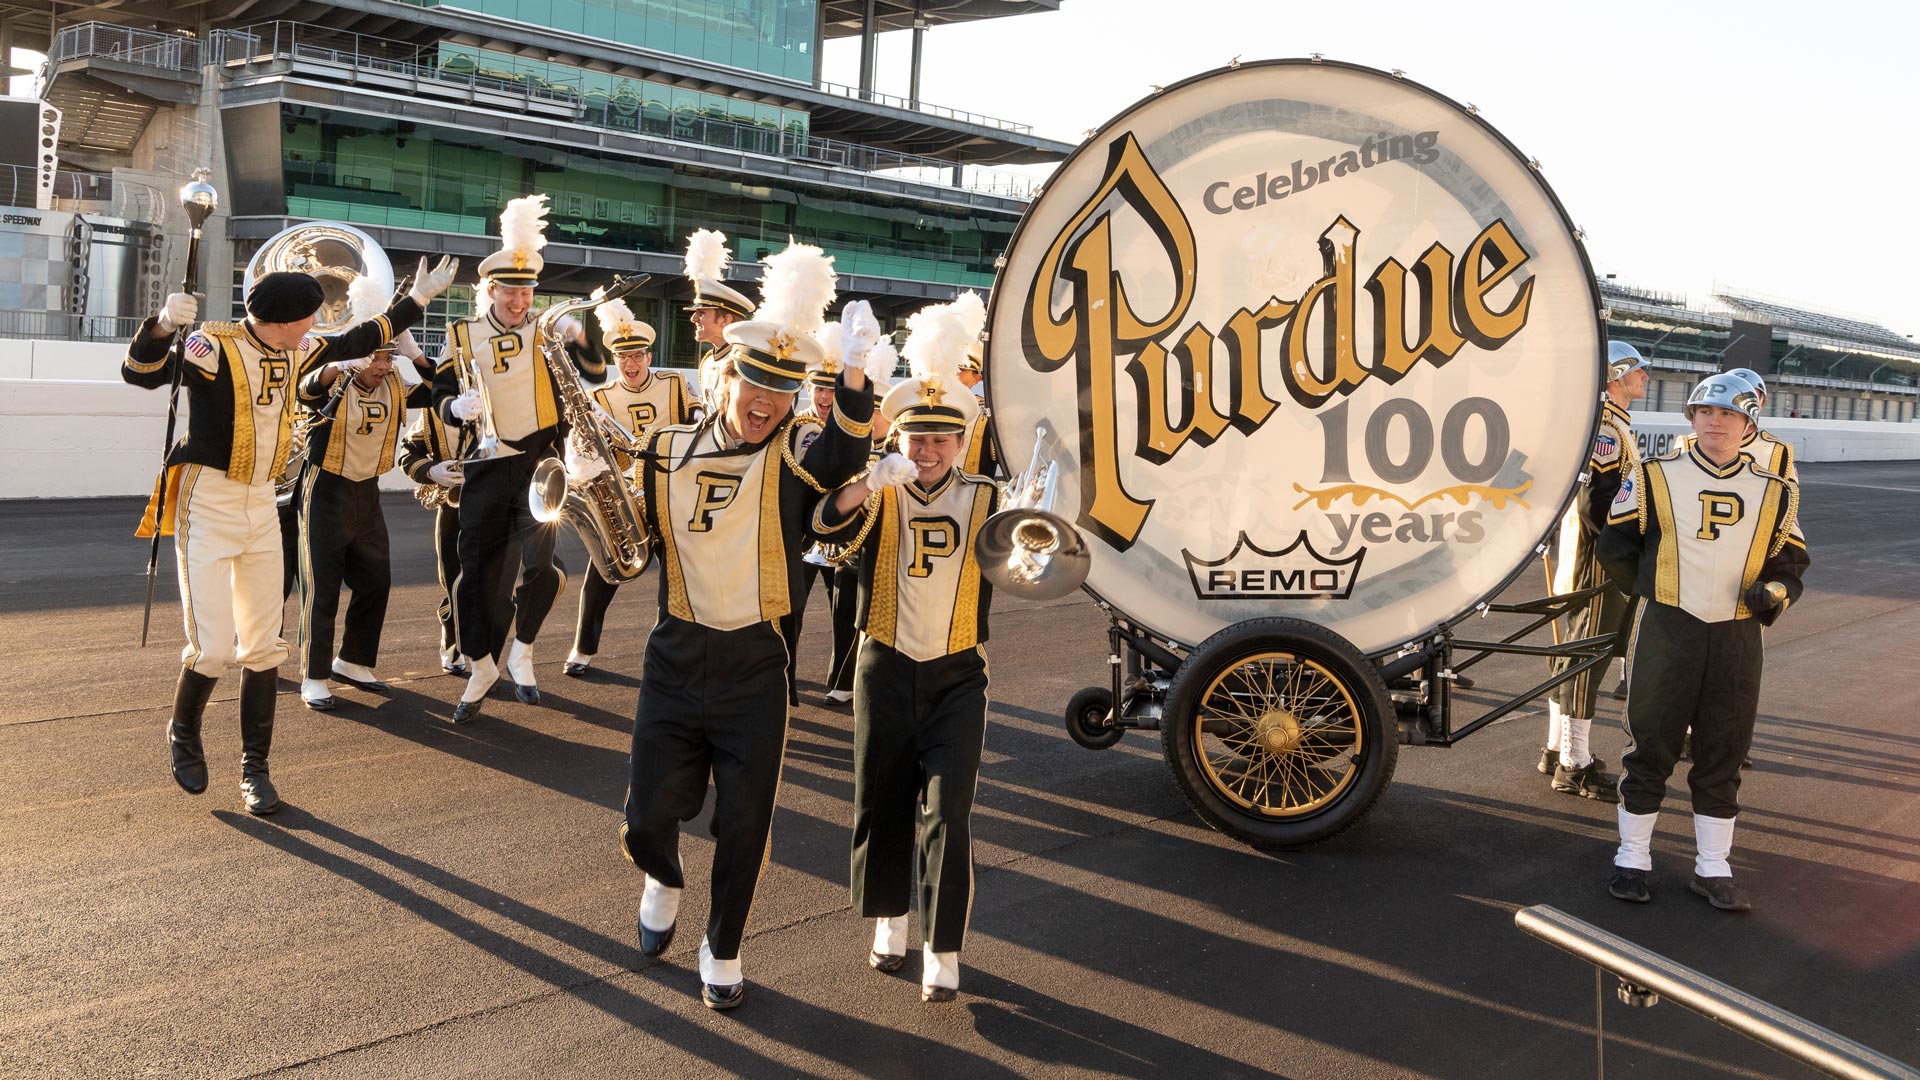 The Purdue University band with the world's largest drum on the Indianapolis Motor Speedway track in front of the pagoda.